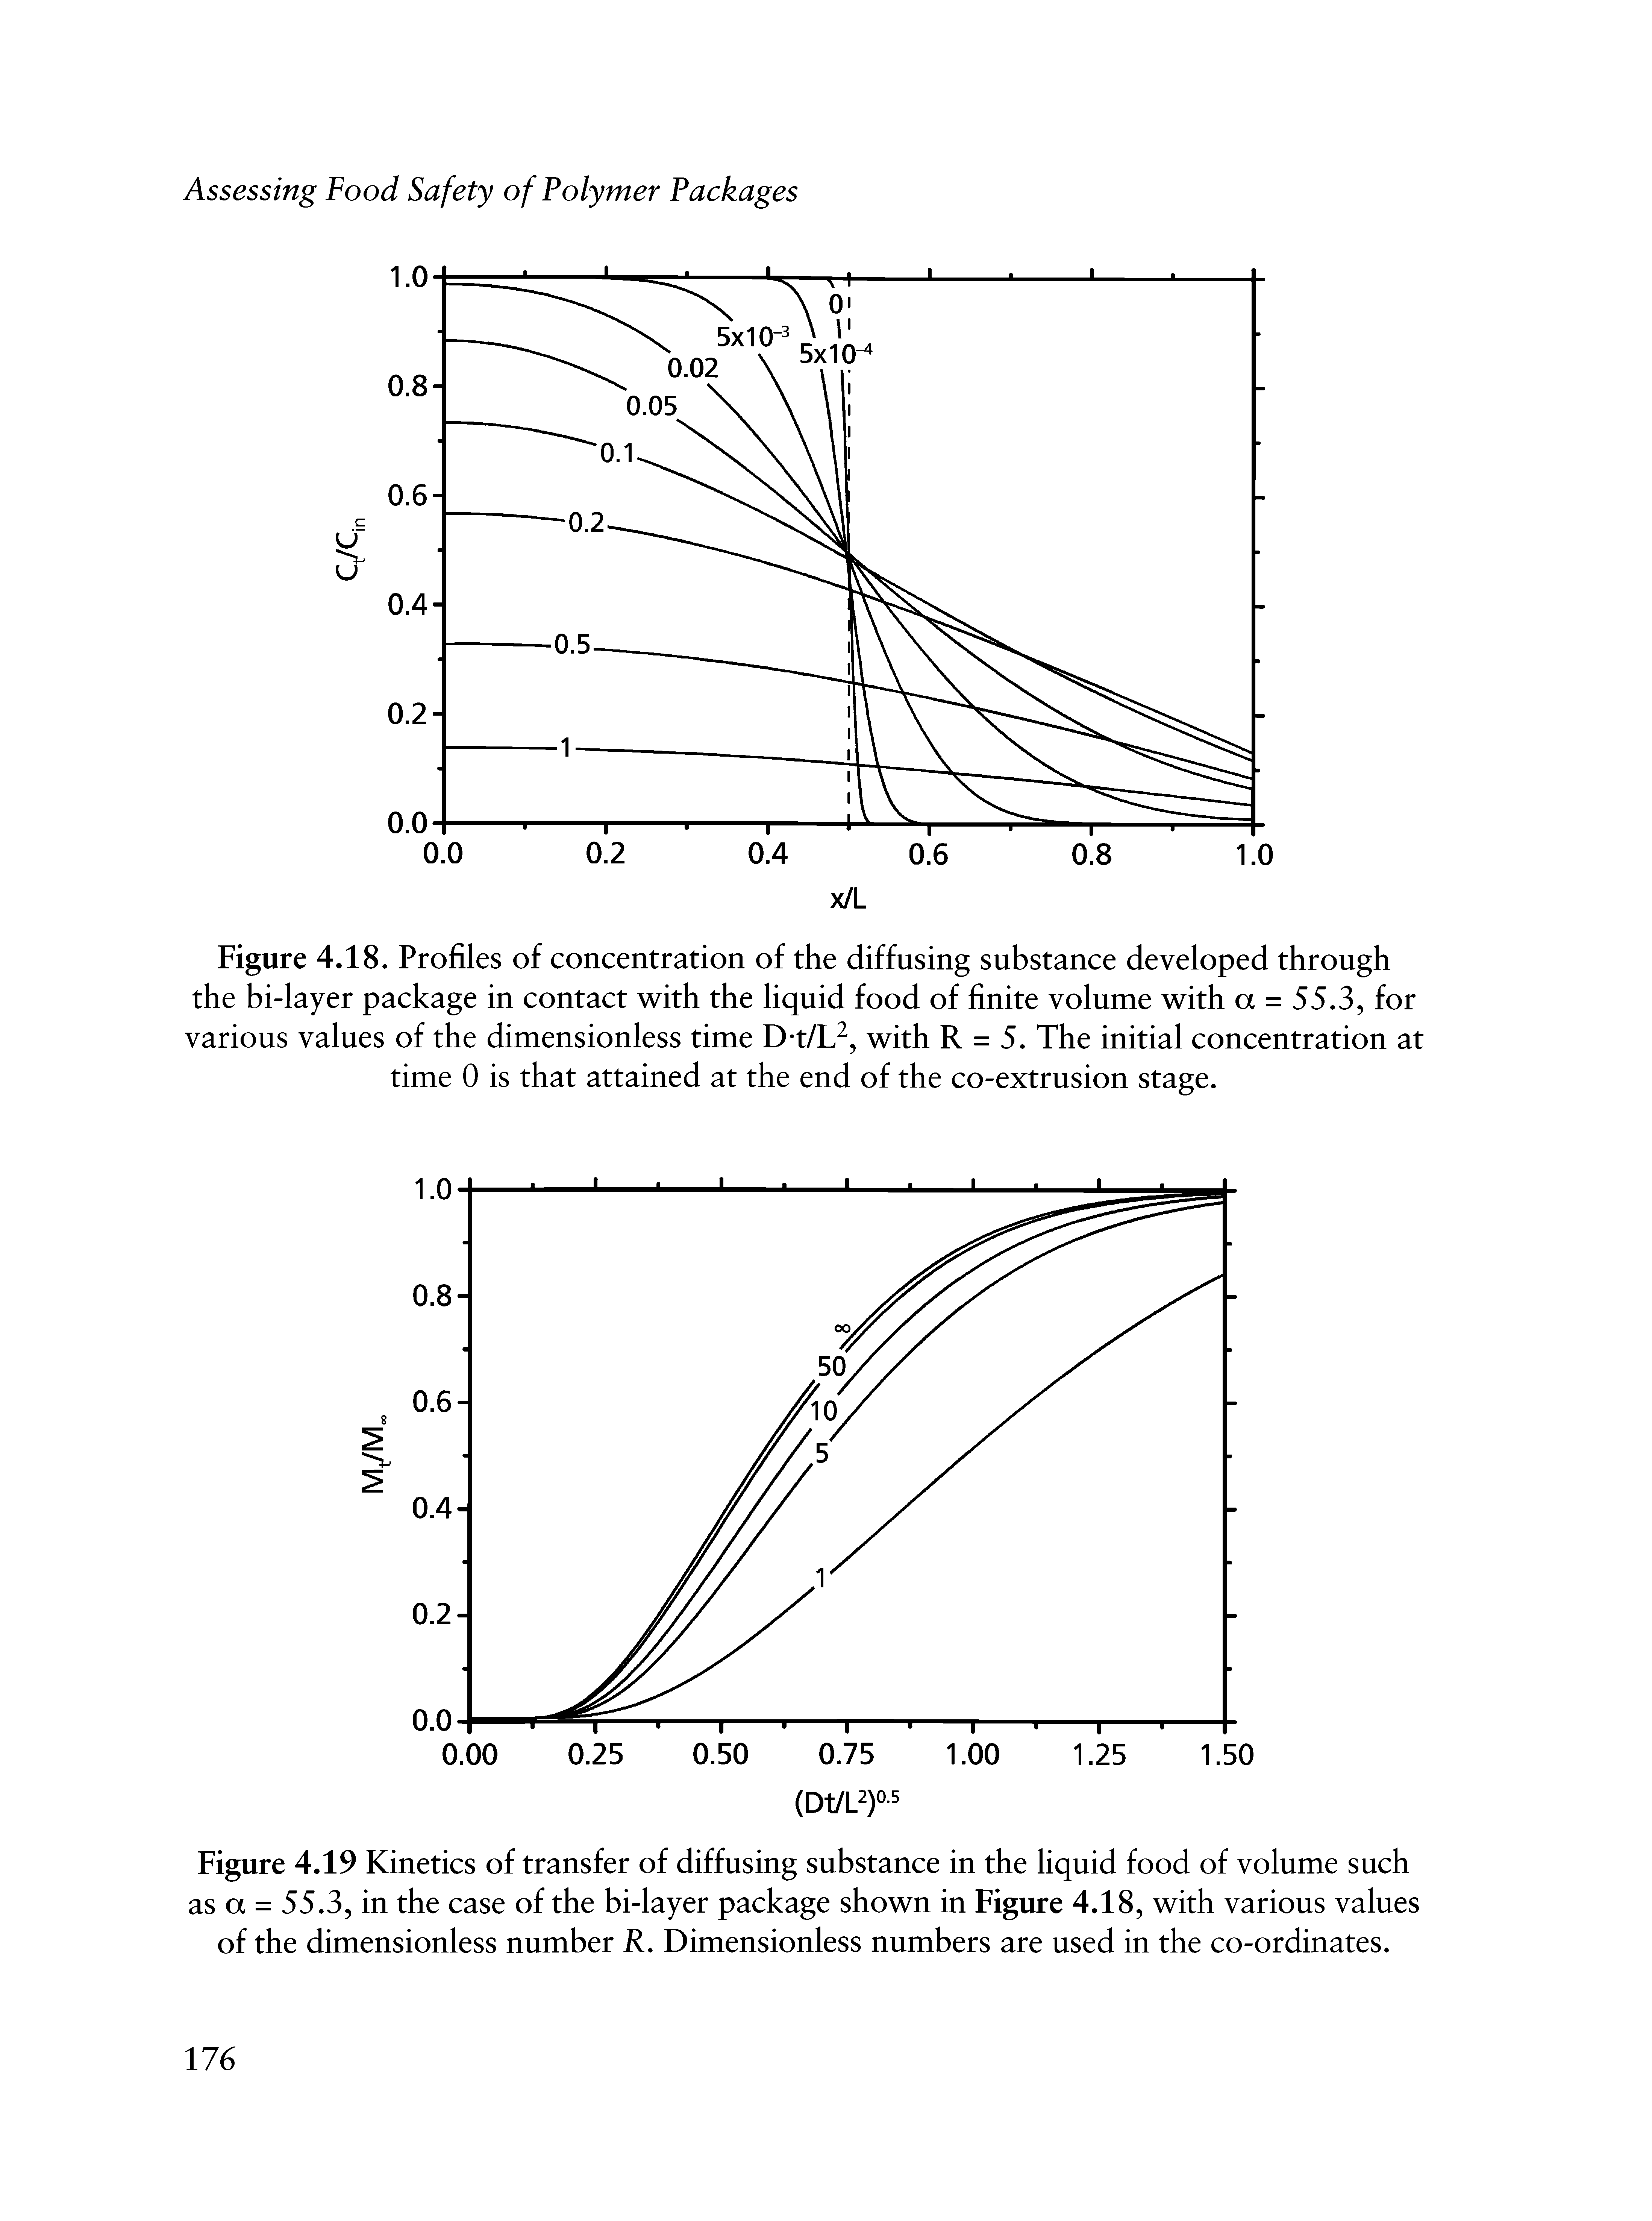 Figure 4.19 Kinetics of transfer of diffusing substance in the liquid food of volume such as a = 55.3, in the case of the bi-layer package shown in Figure 4.18, with various values of the dimensionless number R. Dimensionless numbers are used in the co-ordinates.